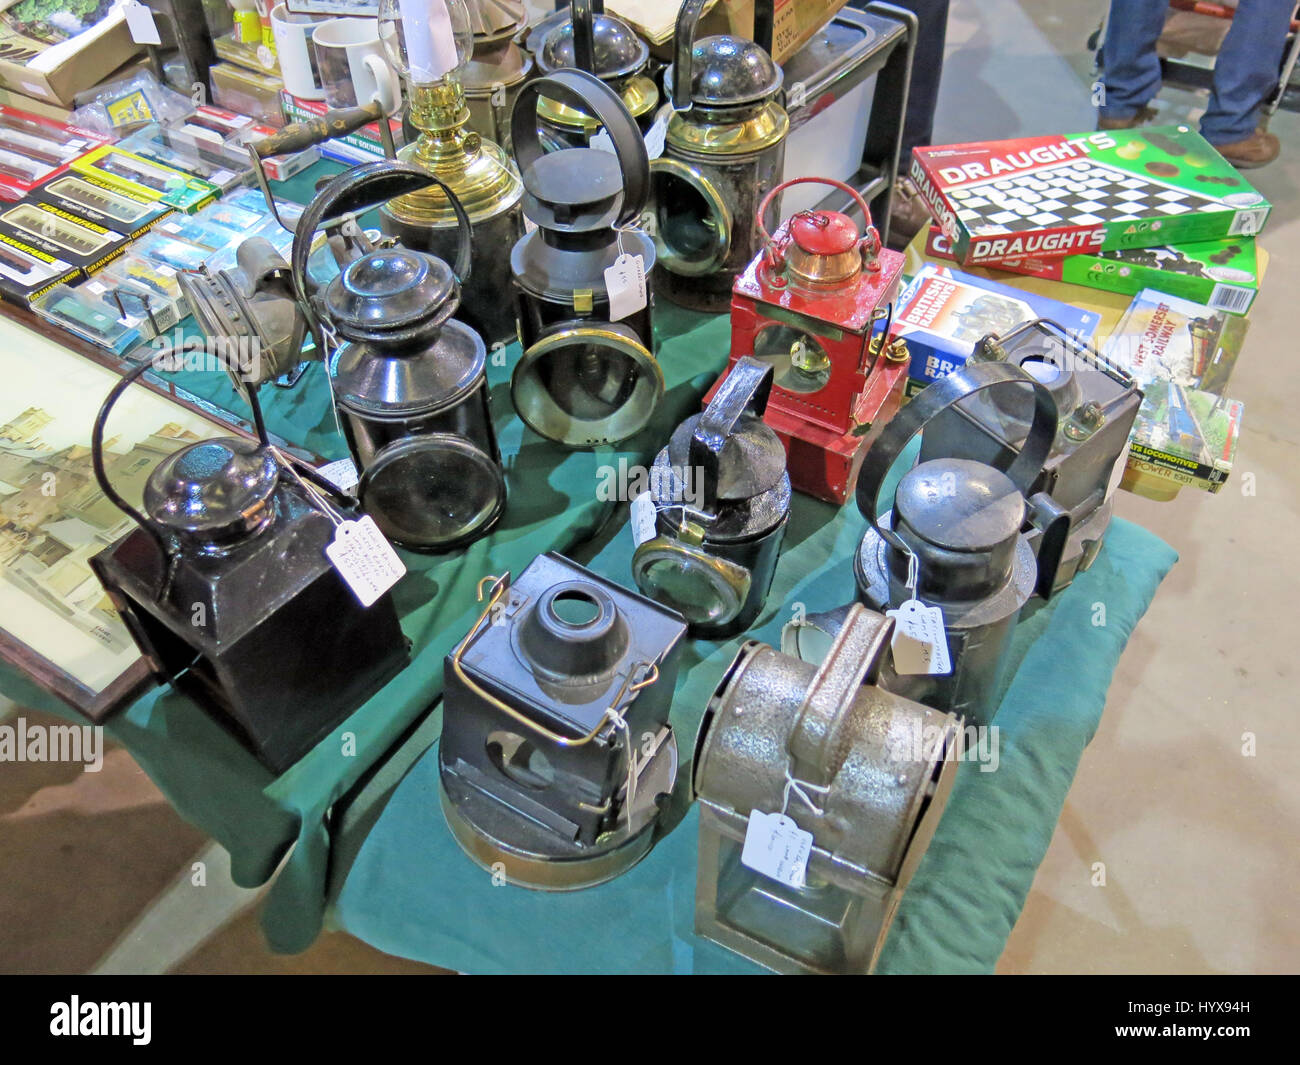 A selection of rare and collectable historic railway hand lamps for sale at a Vintage Toy Fair at the Bath & West Showground, Somerset, England Stock Photo